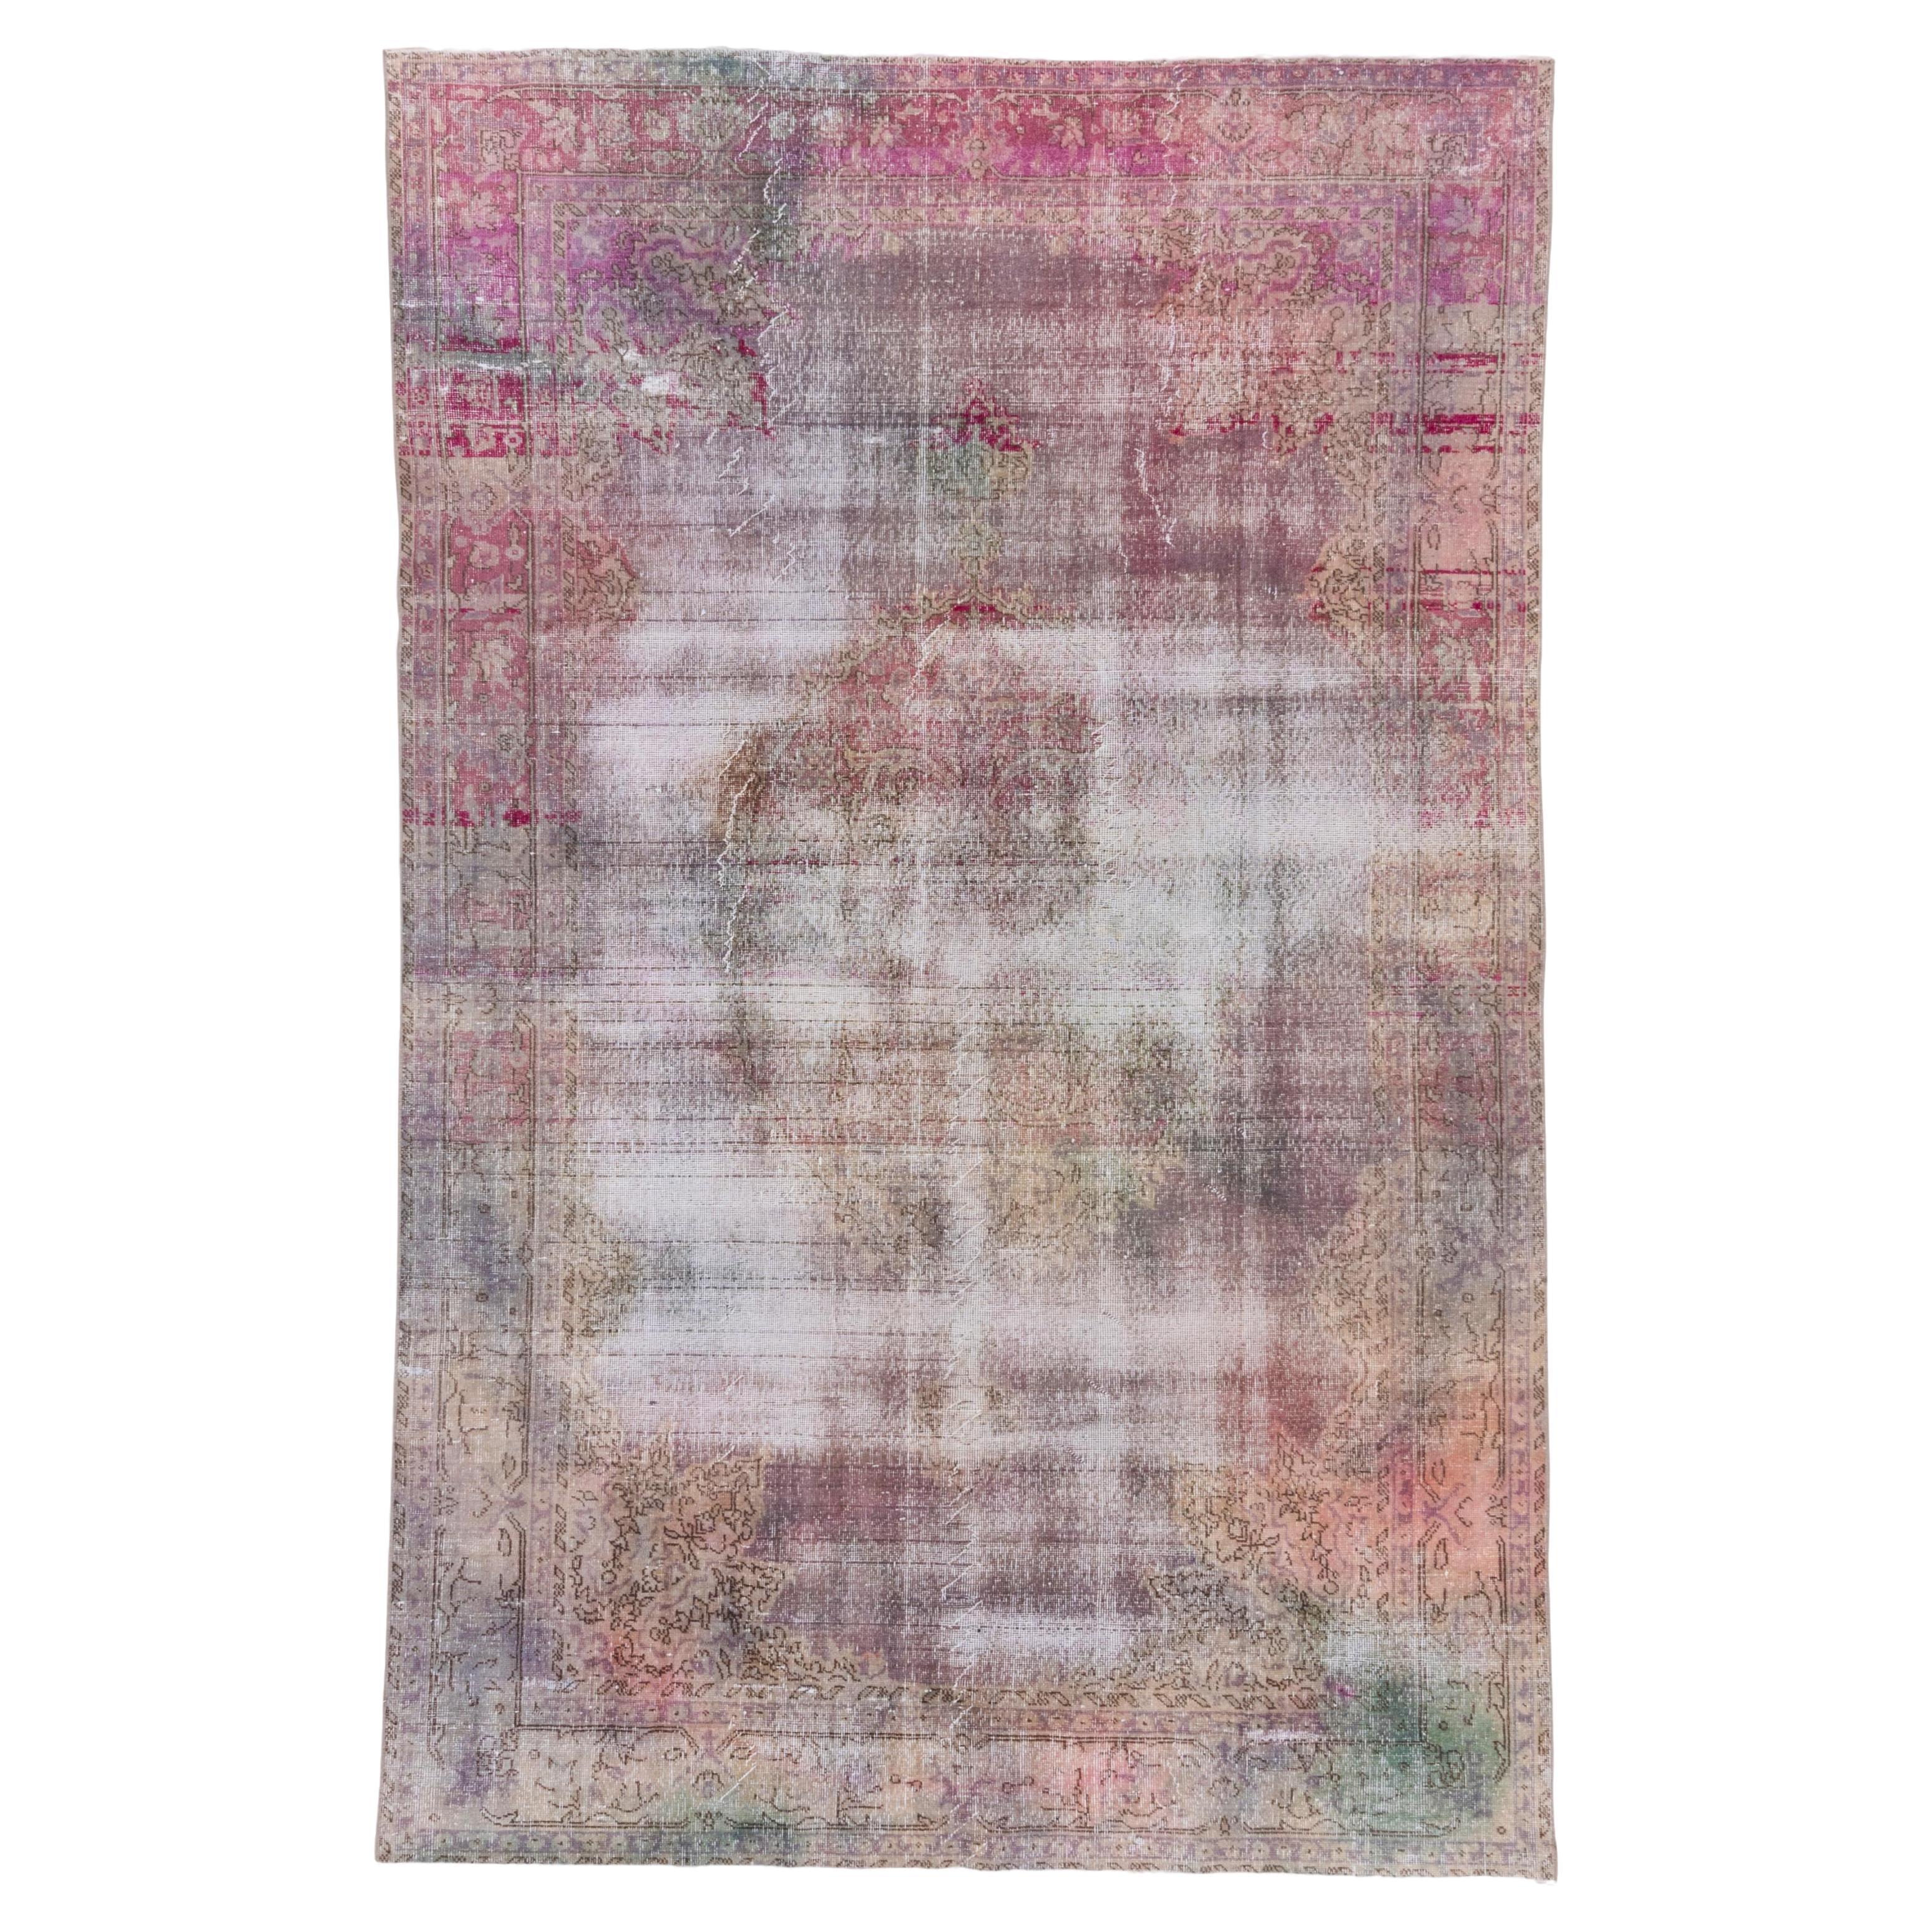 Turkish Dyed Pink Purple Shabby Chic Rug 1960 For Sale